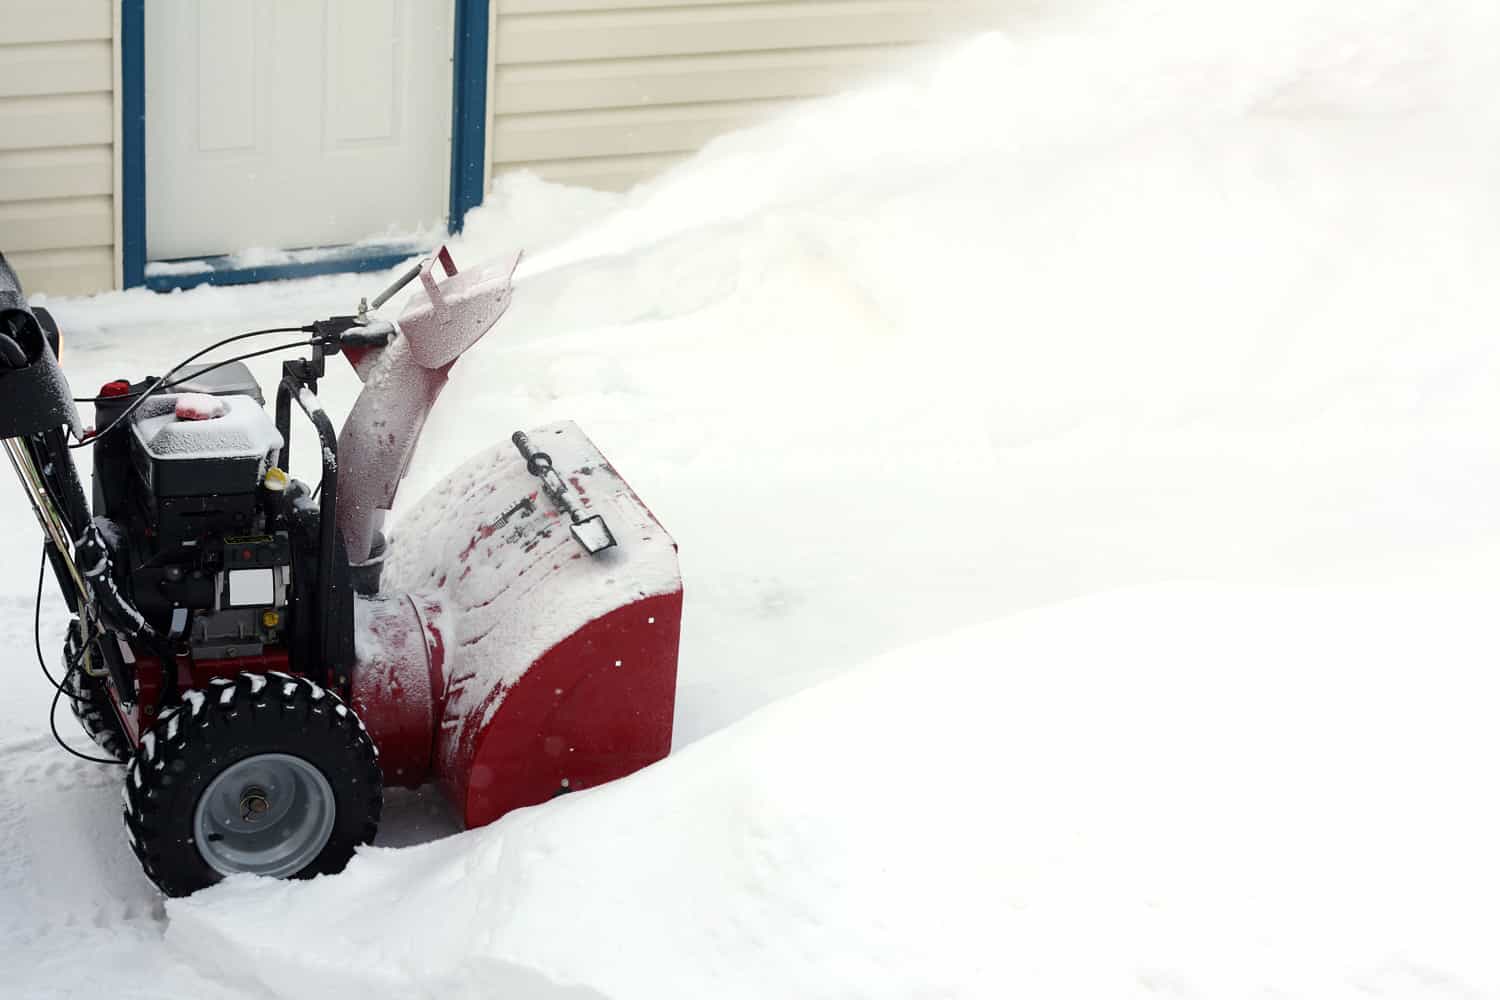 A photograph of a snow blower in action outside a home.